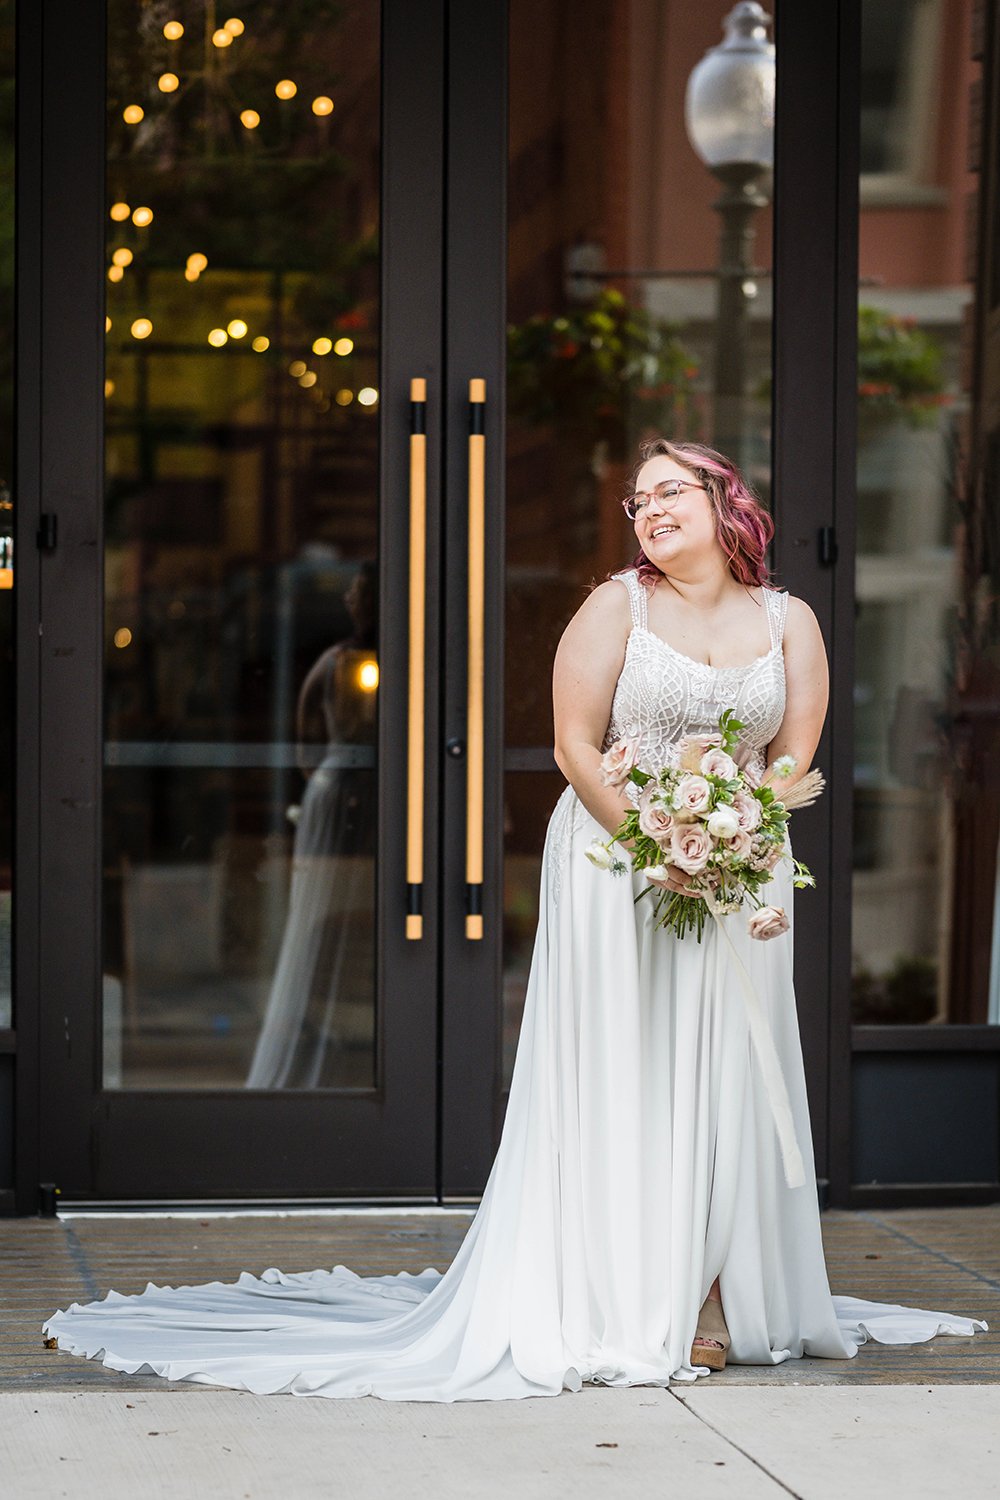 A wedding bride stands in front of the Fire Station One holds their wedding bouquet and smiles looking away from the camera.